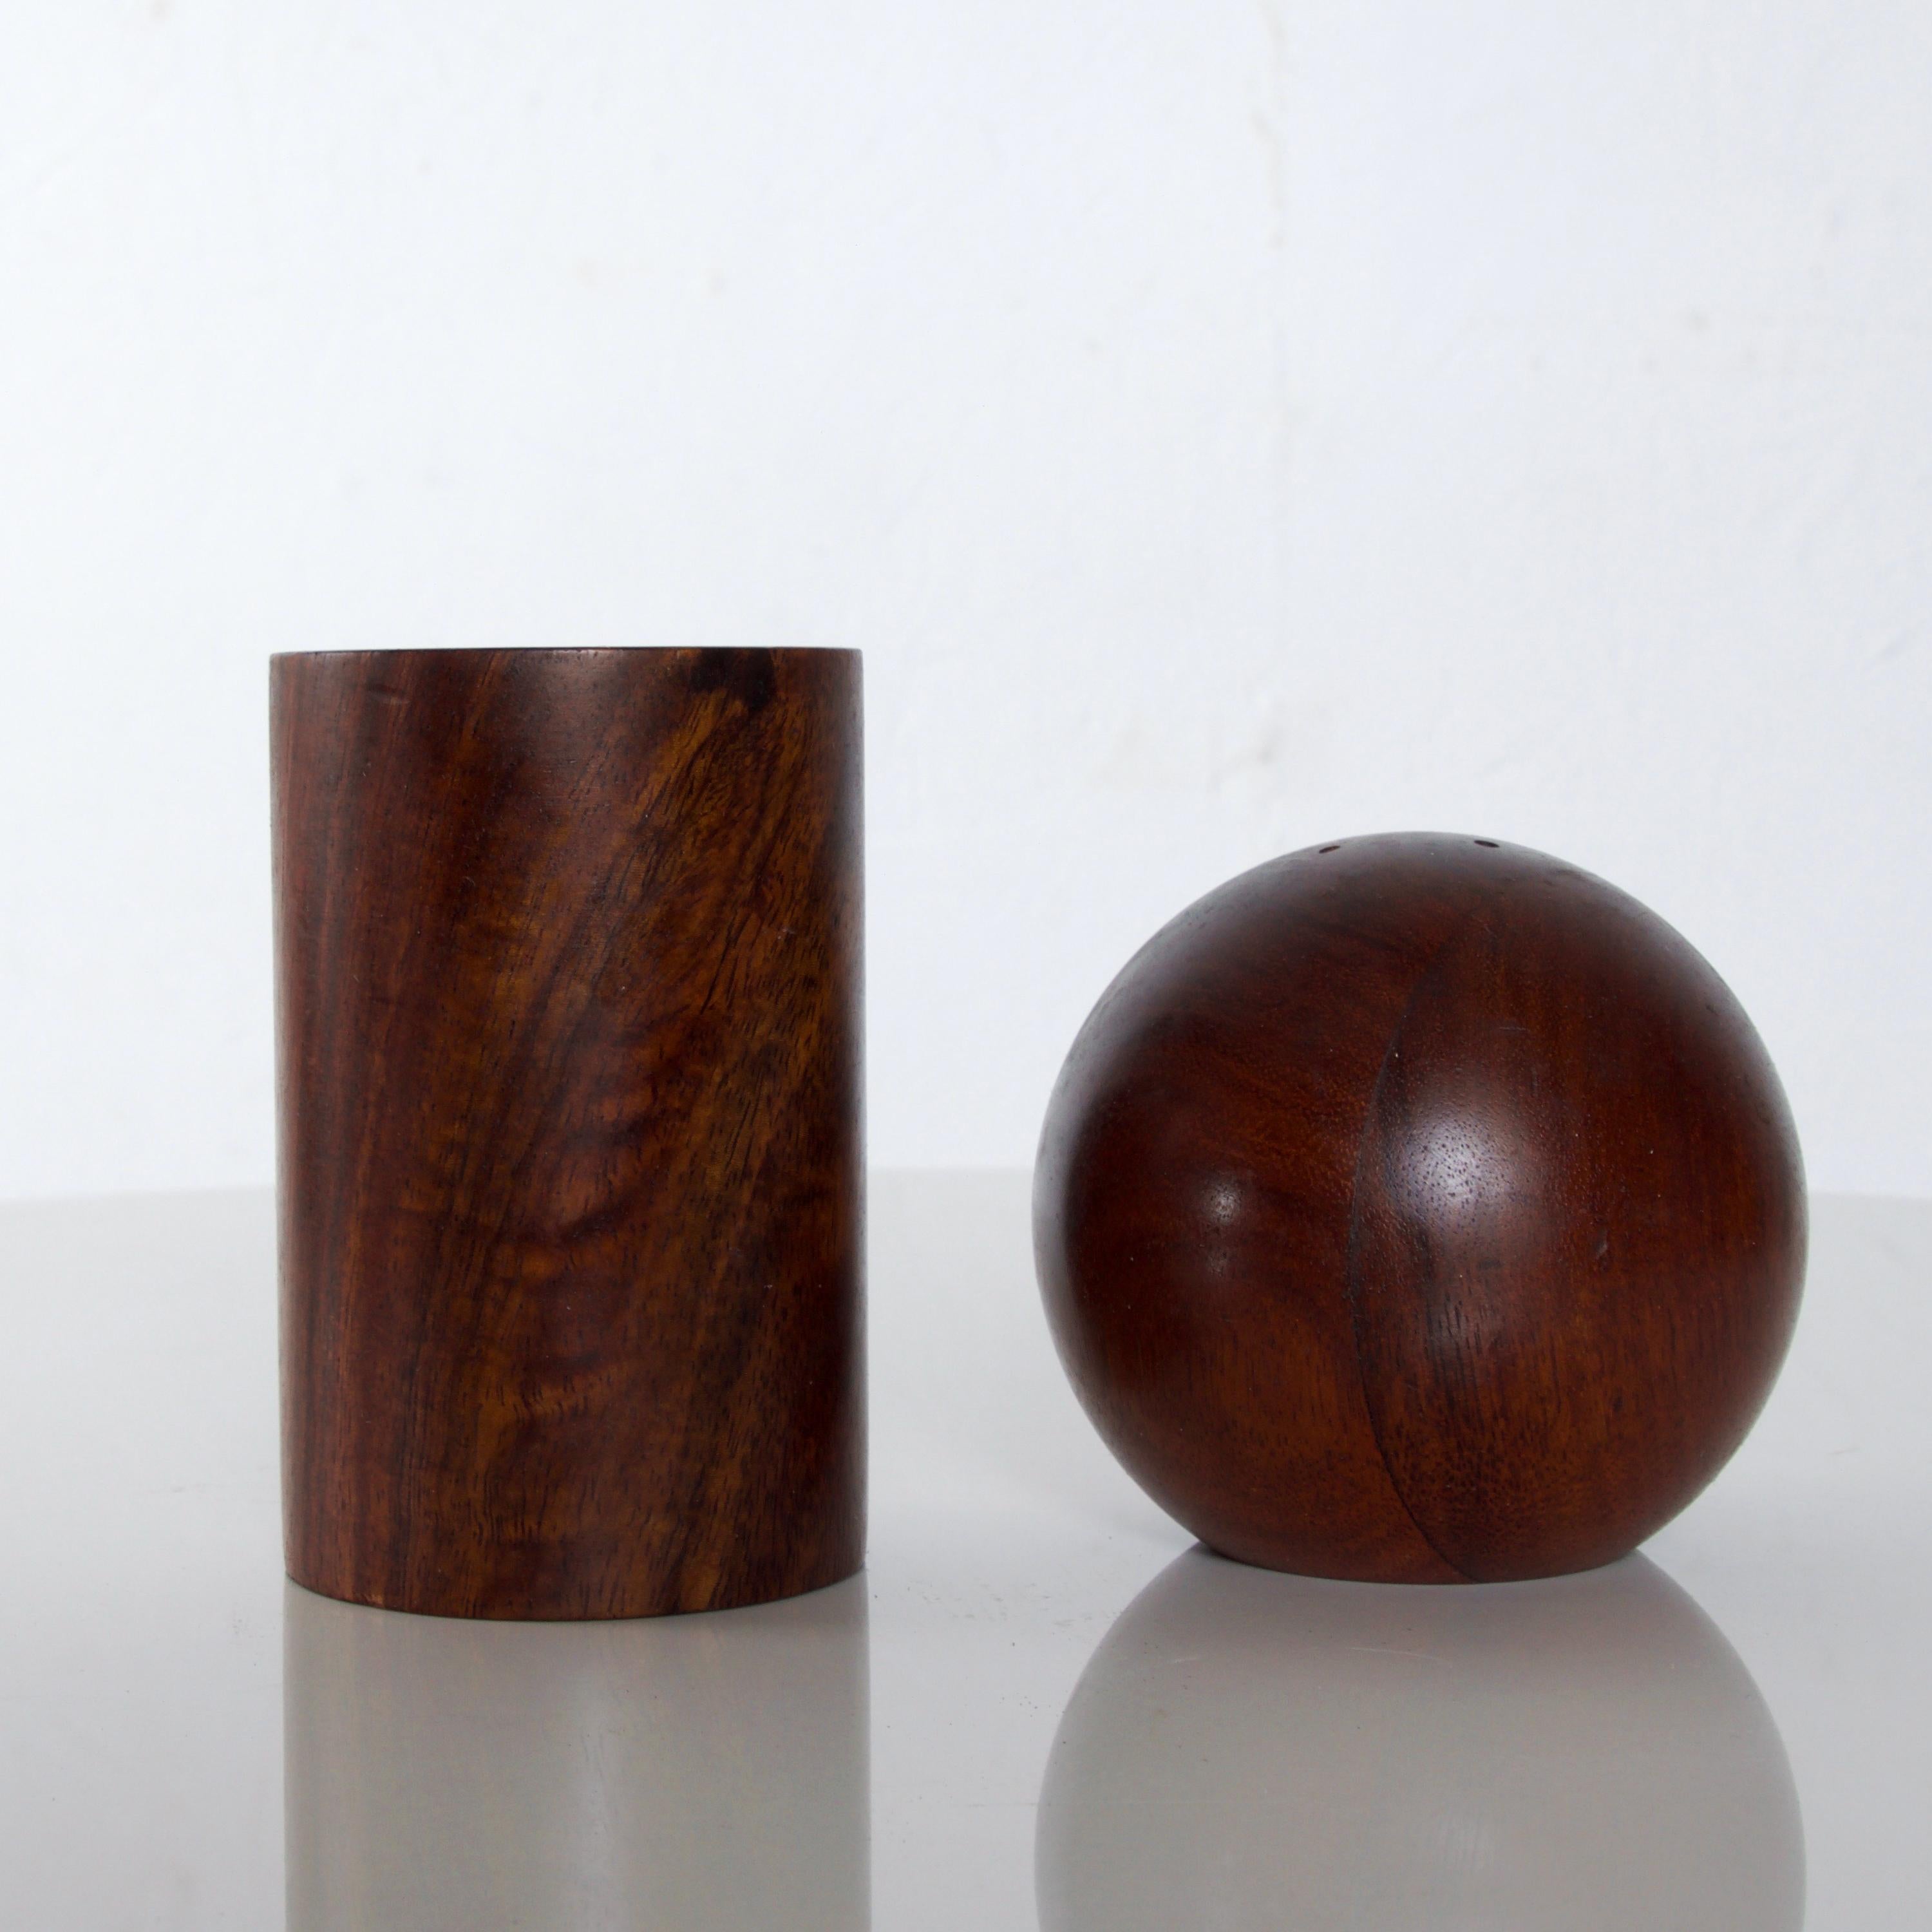 Scandinavian Mid-Century Modern fabulous geometric set salt and pepper shaker in rich rosewood from Denmark, 1960s
Modern shaped design a circle ball and a cylinder as shakers.
Measures: 6.25 height x 3 inches diameter, ball 3 x 3, cylinder 3.5